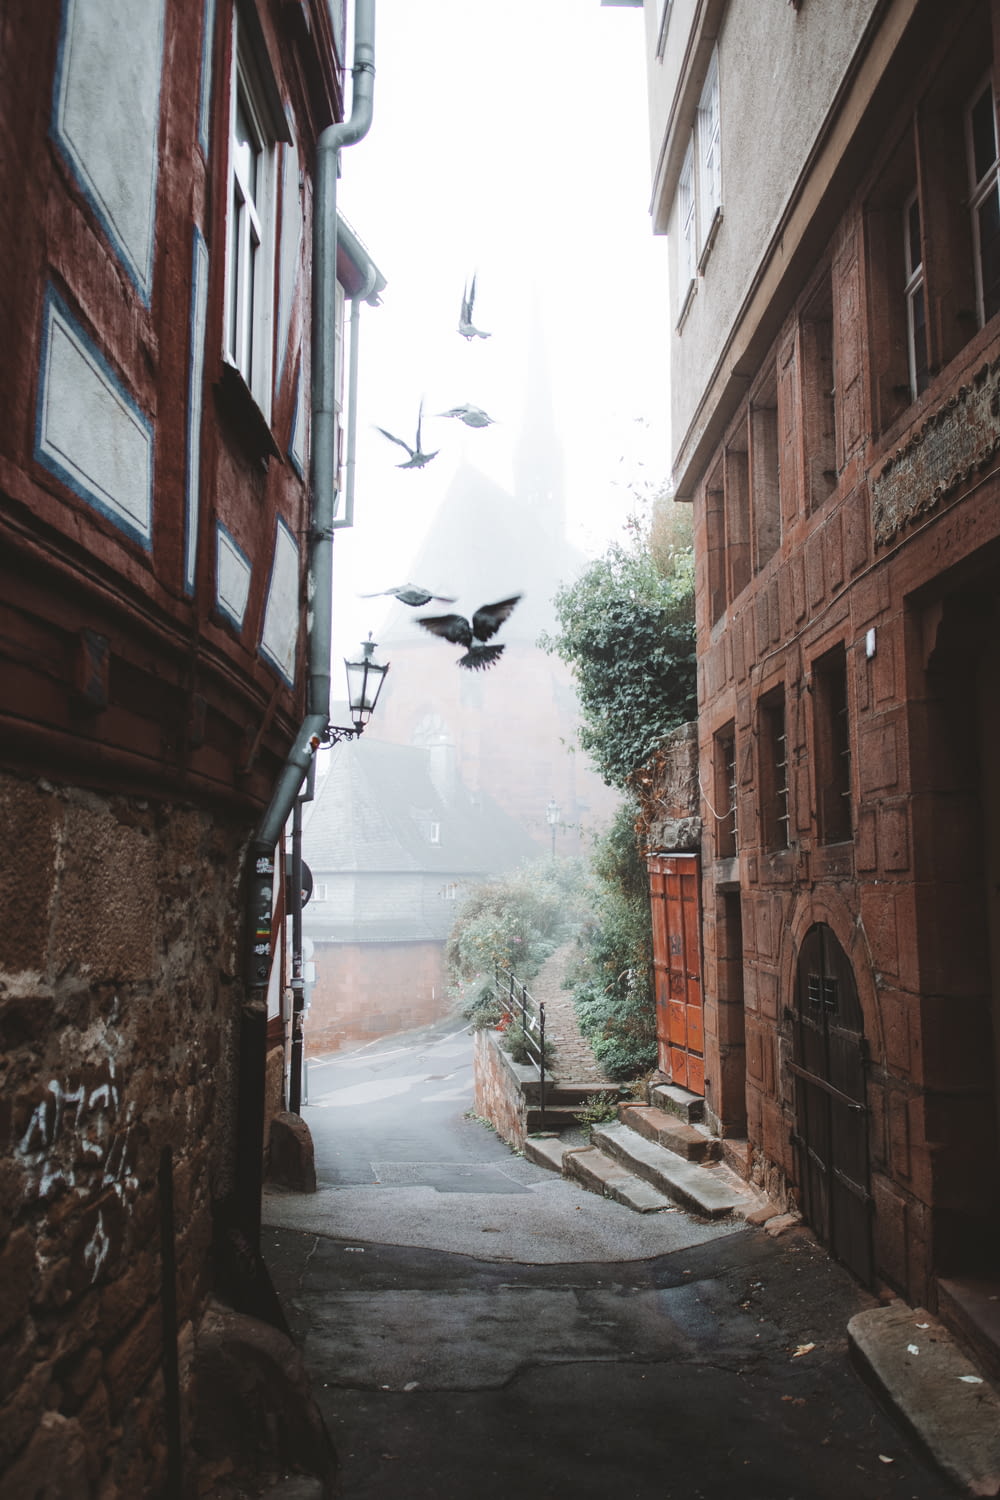 a group of birds flying over a narrow alley between buildings